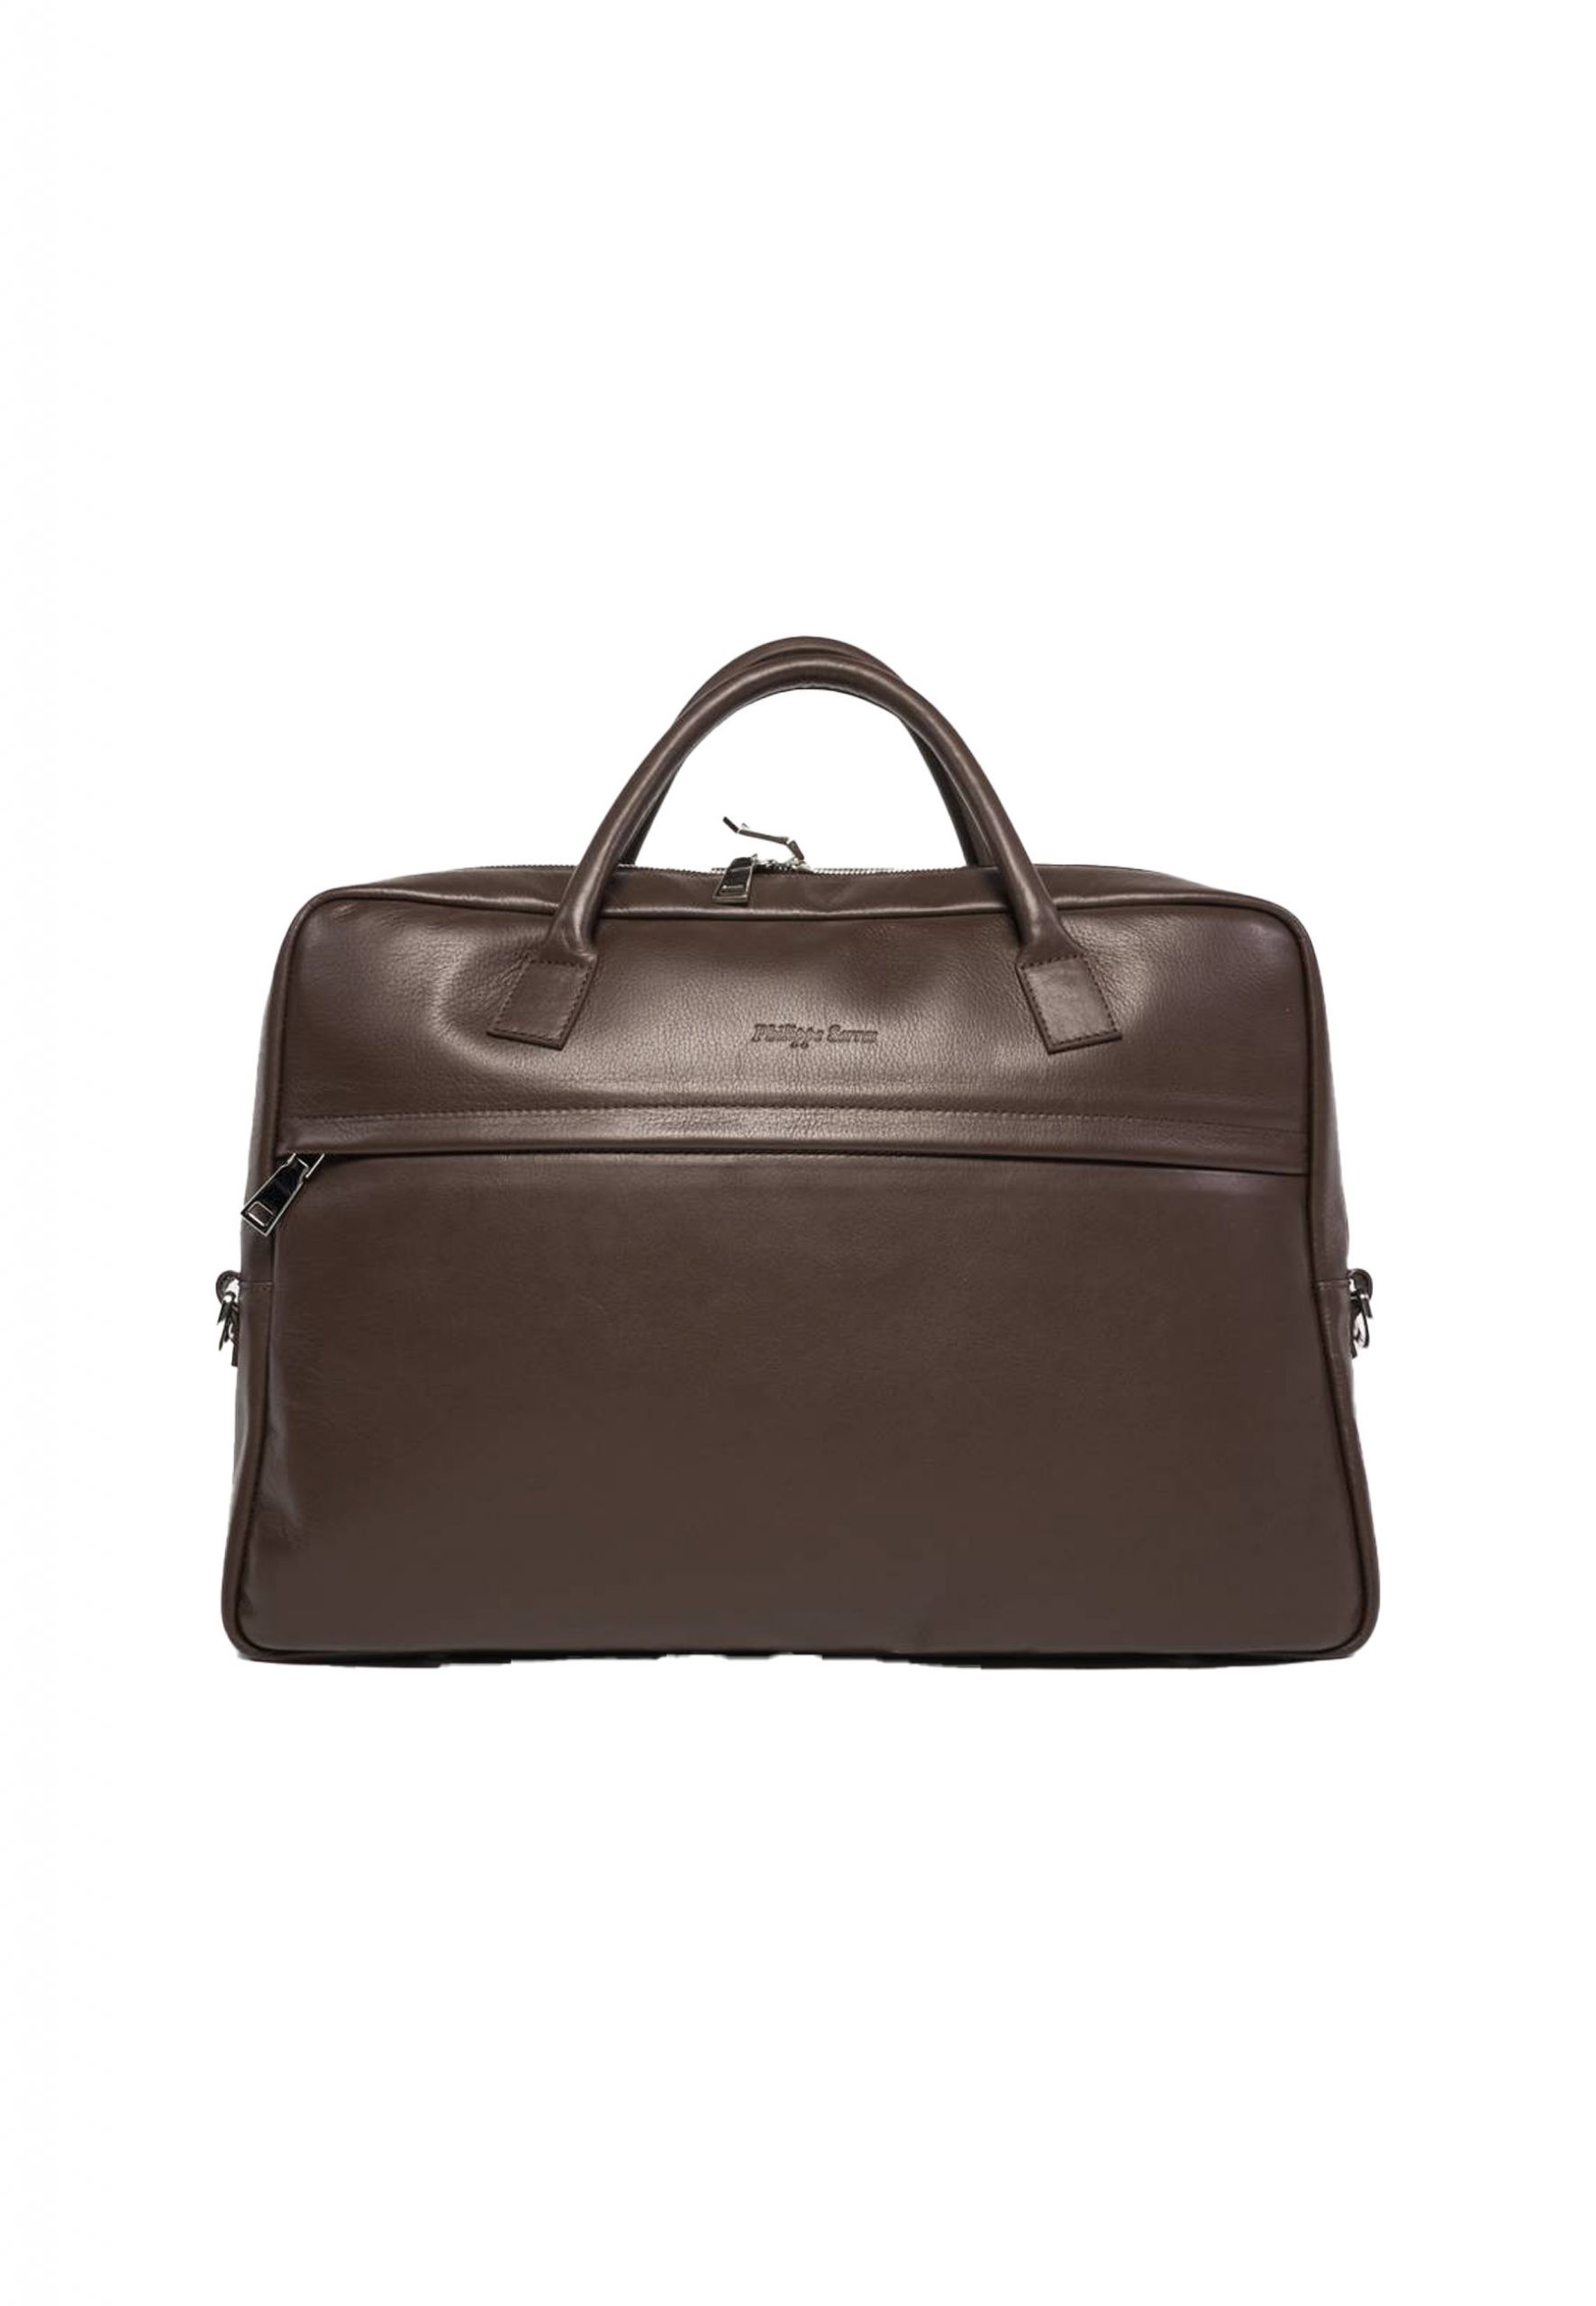 Sac business porte document Philippe Serres 100% Made in France